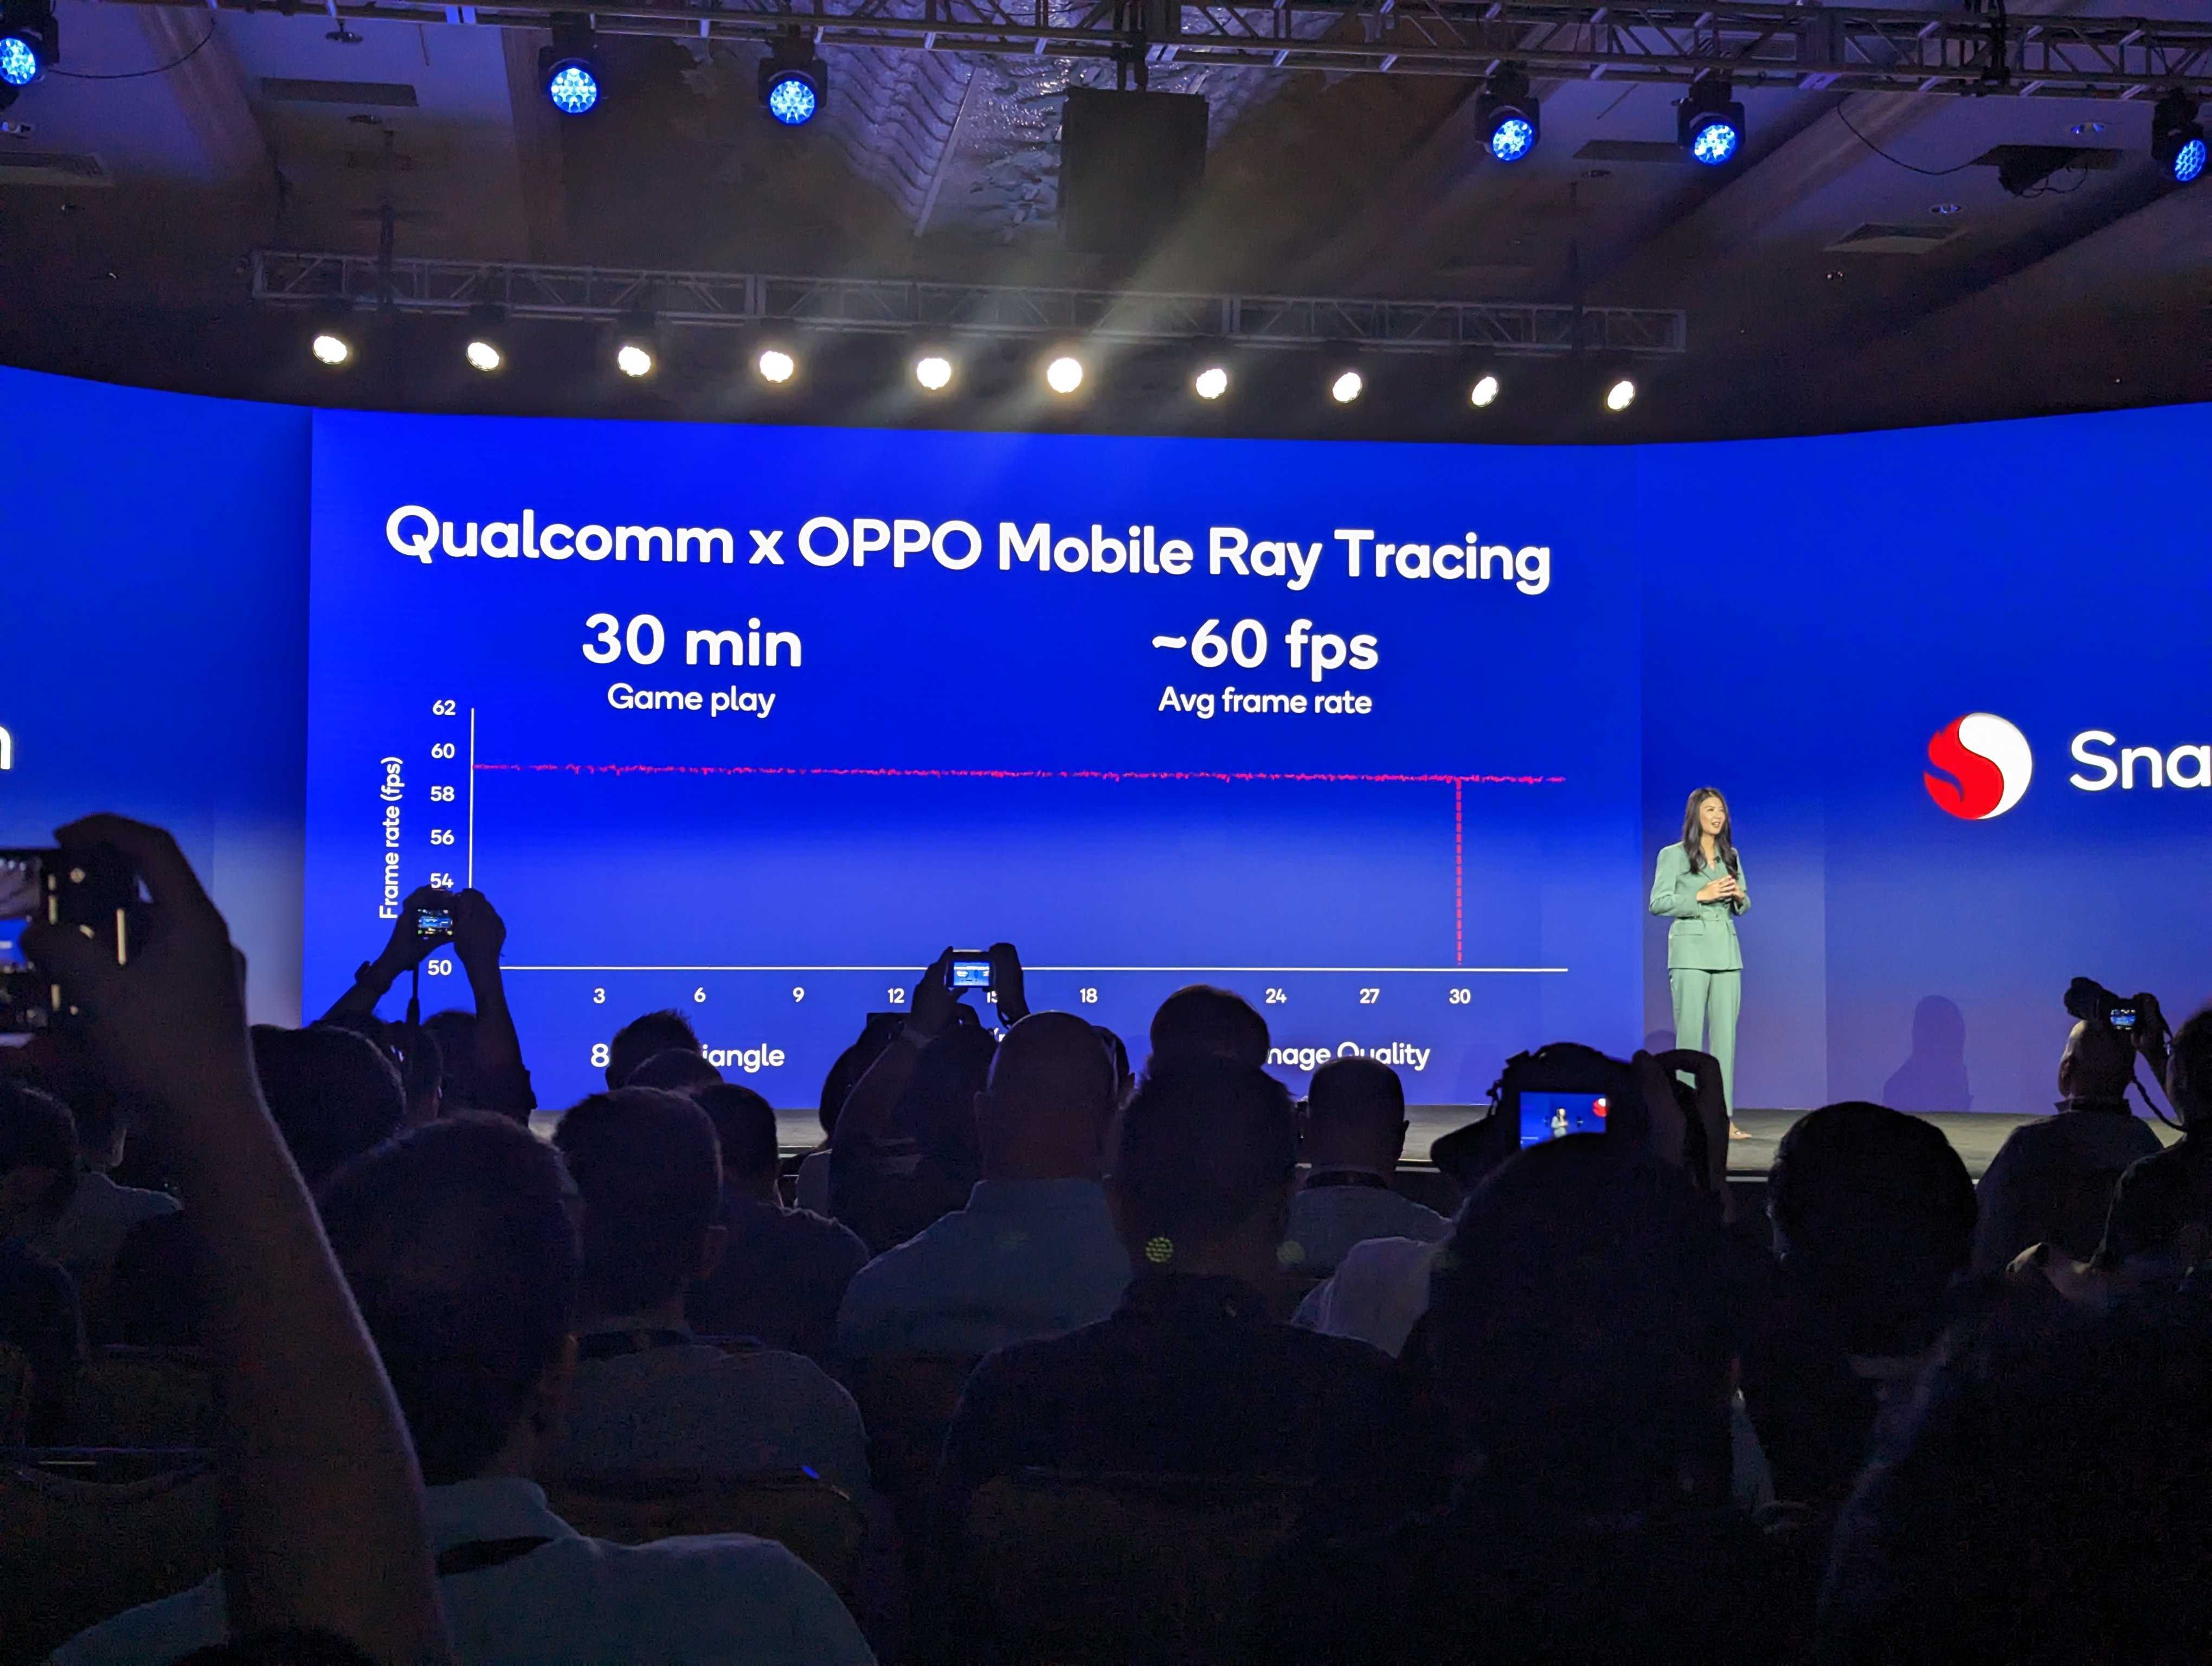 Oppo's Jane Tian on stage at the Qualcomm Snapdragon Summit 2022, talking about Oppo's 8 Gen 2 ray tracing tests